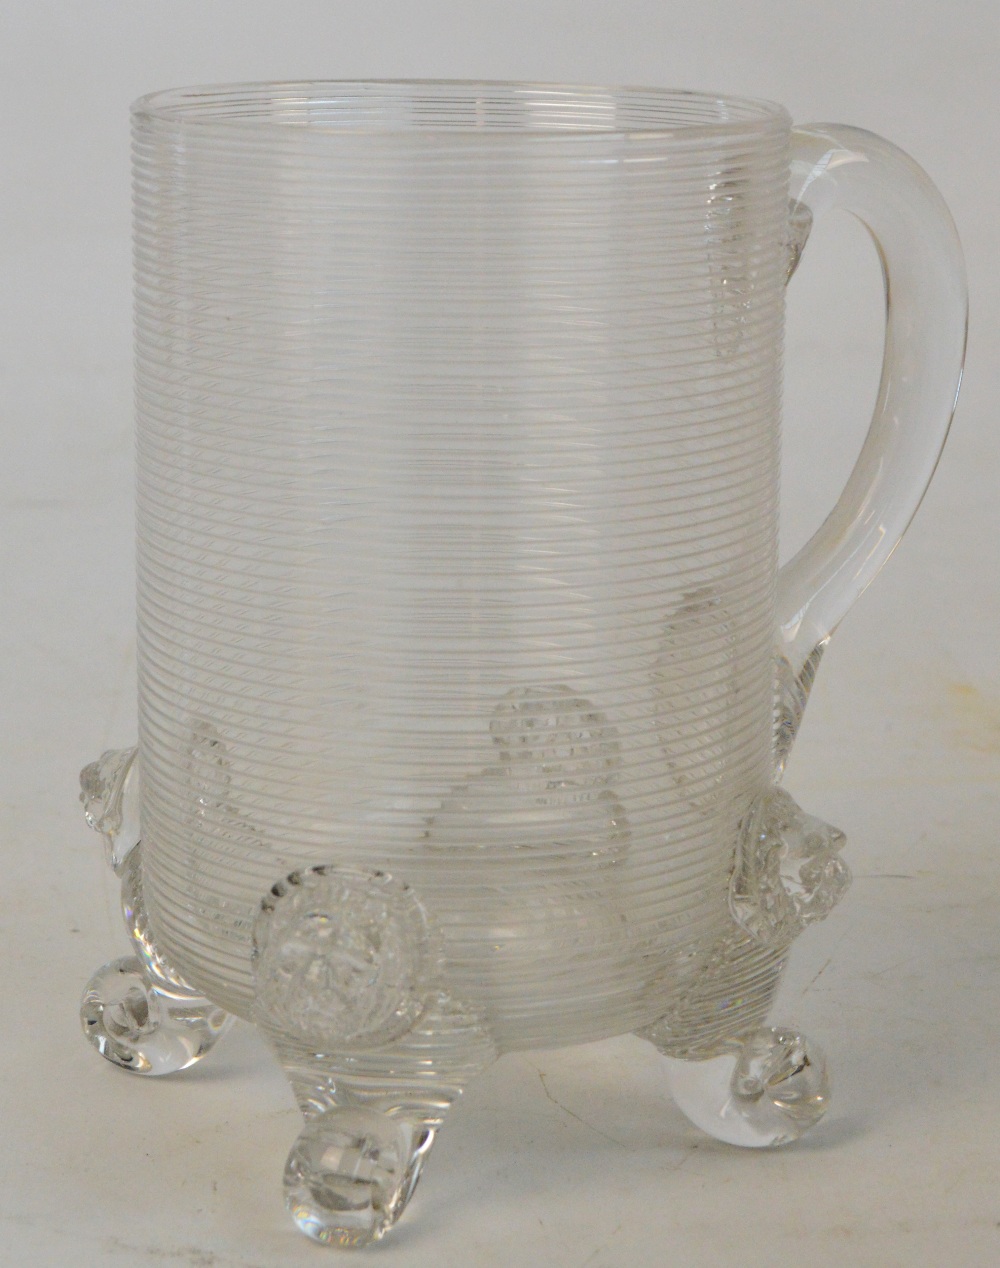 A large quantity of decorative glass including a cranberry tinted jug, various wine glasses, - Image 2 of 2